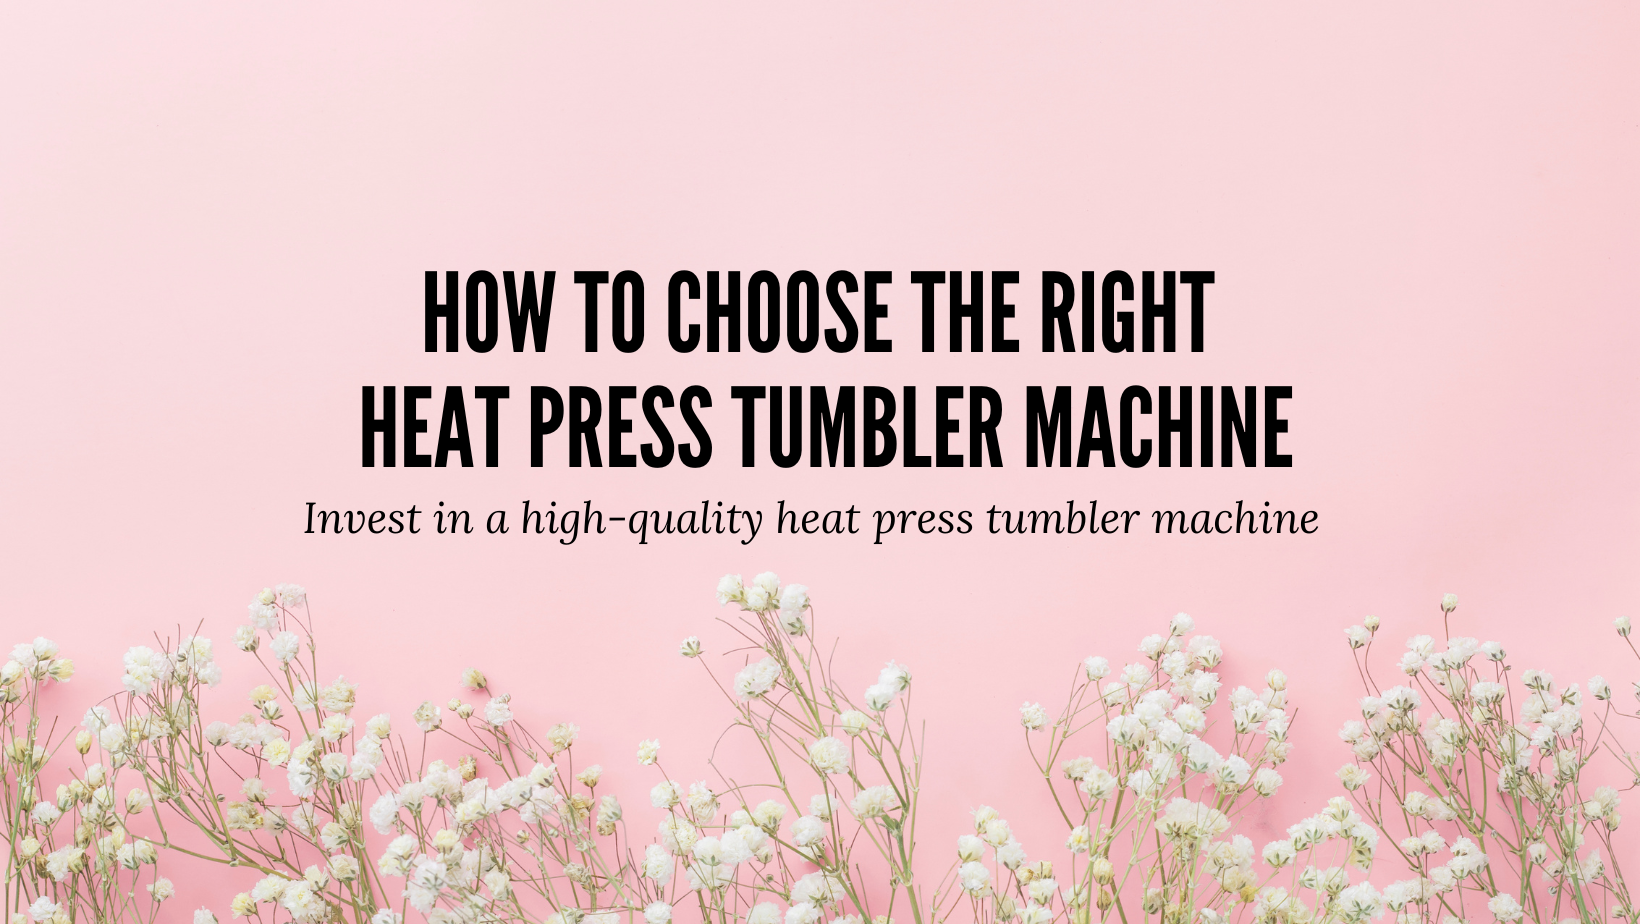 How to Choose the Right Heat Press Tumbler Machine